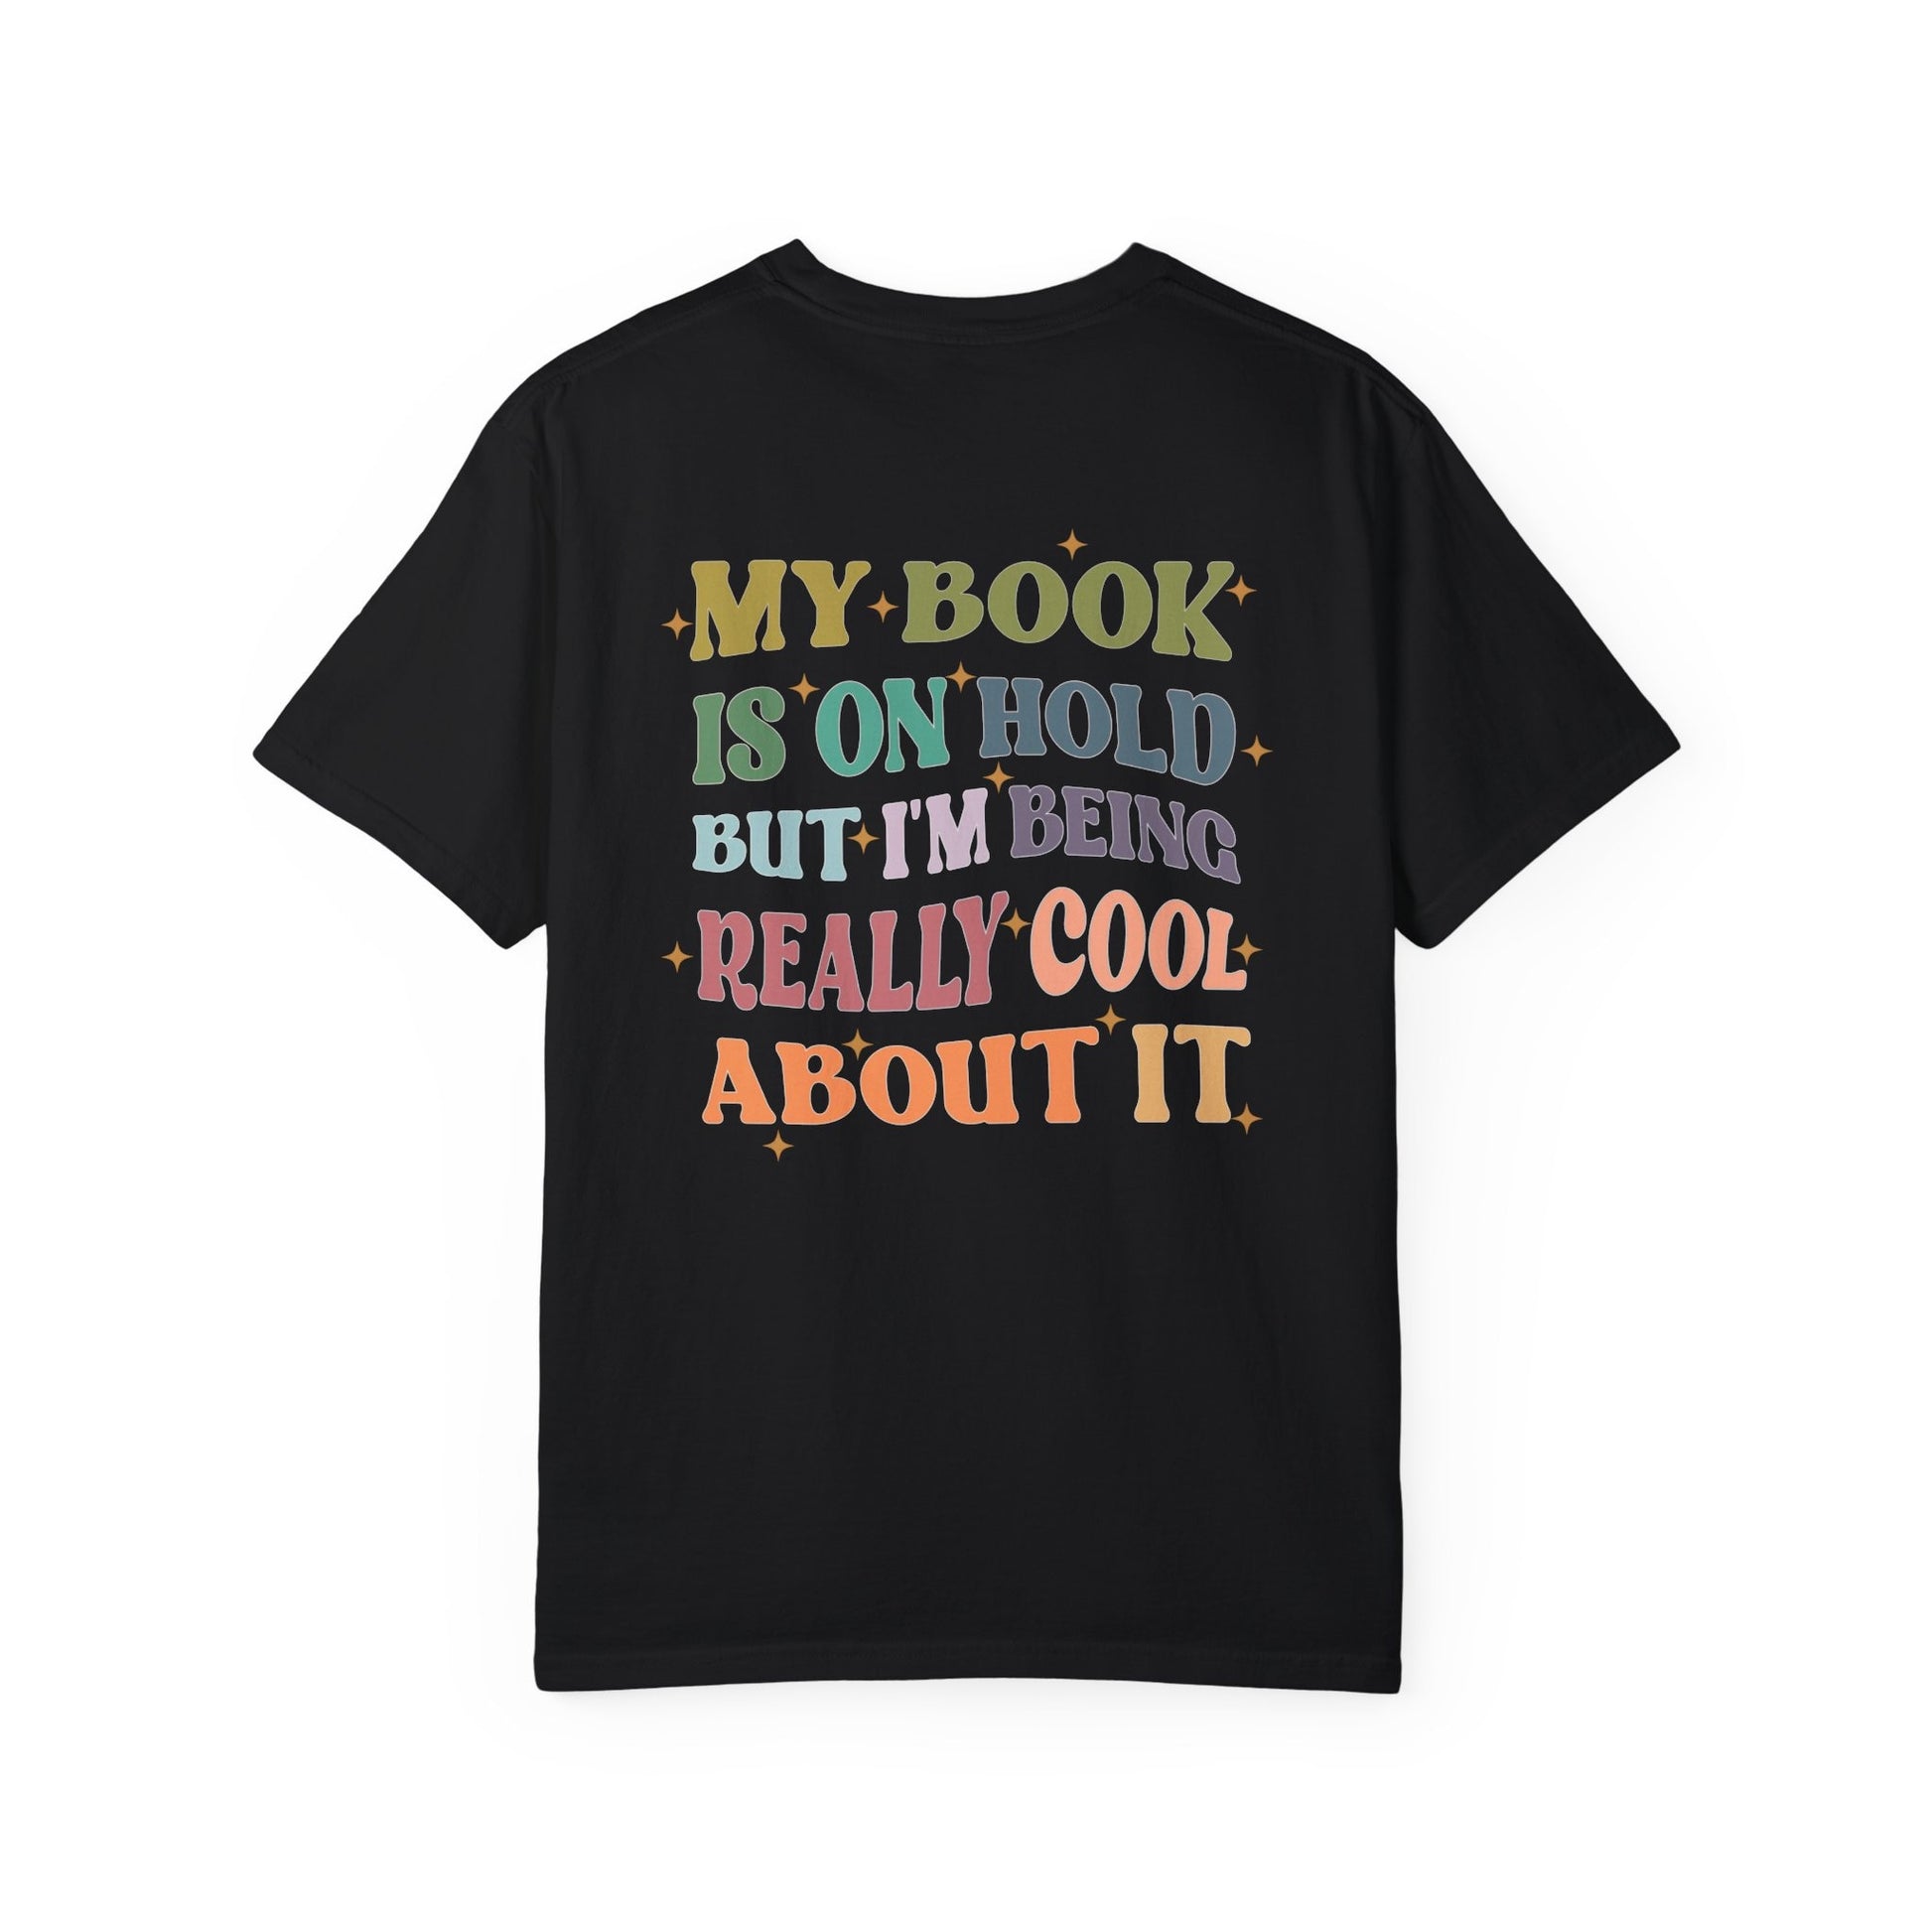 Support Your Library Shirt Book Shirt Bookish Things Booktok Merch Book Club Emotional Reading Tee Born To Read Dark Romance Spicy Book Tee